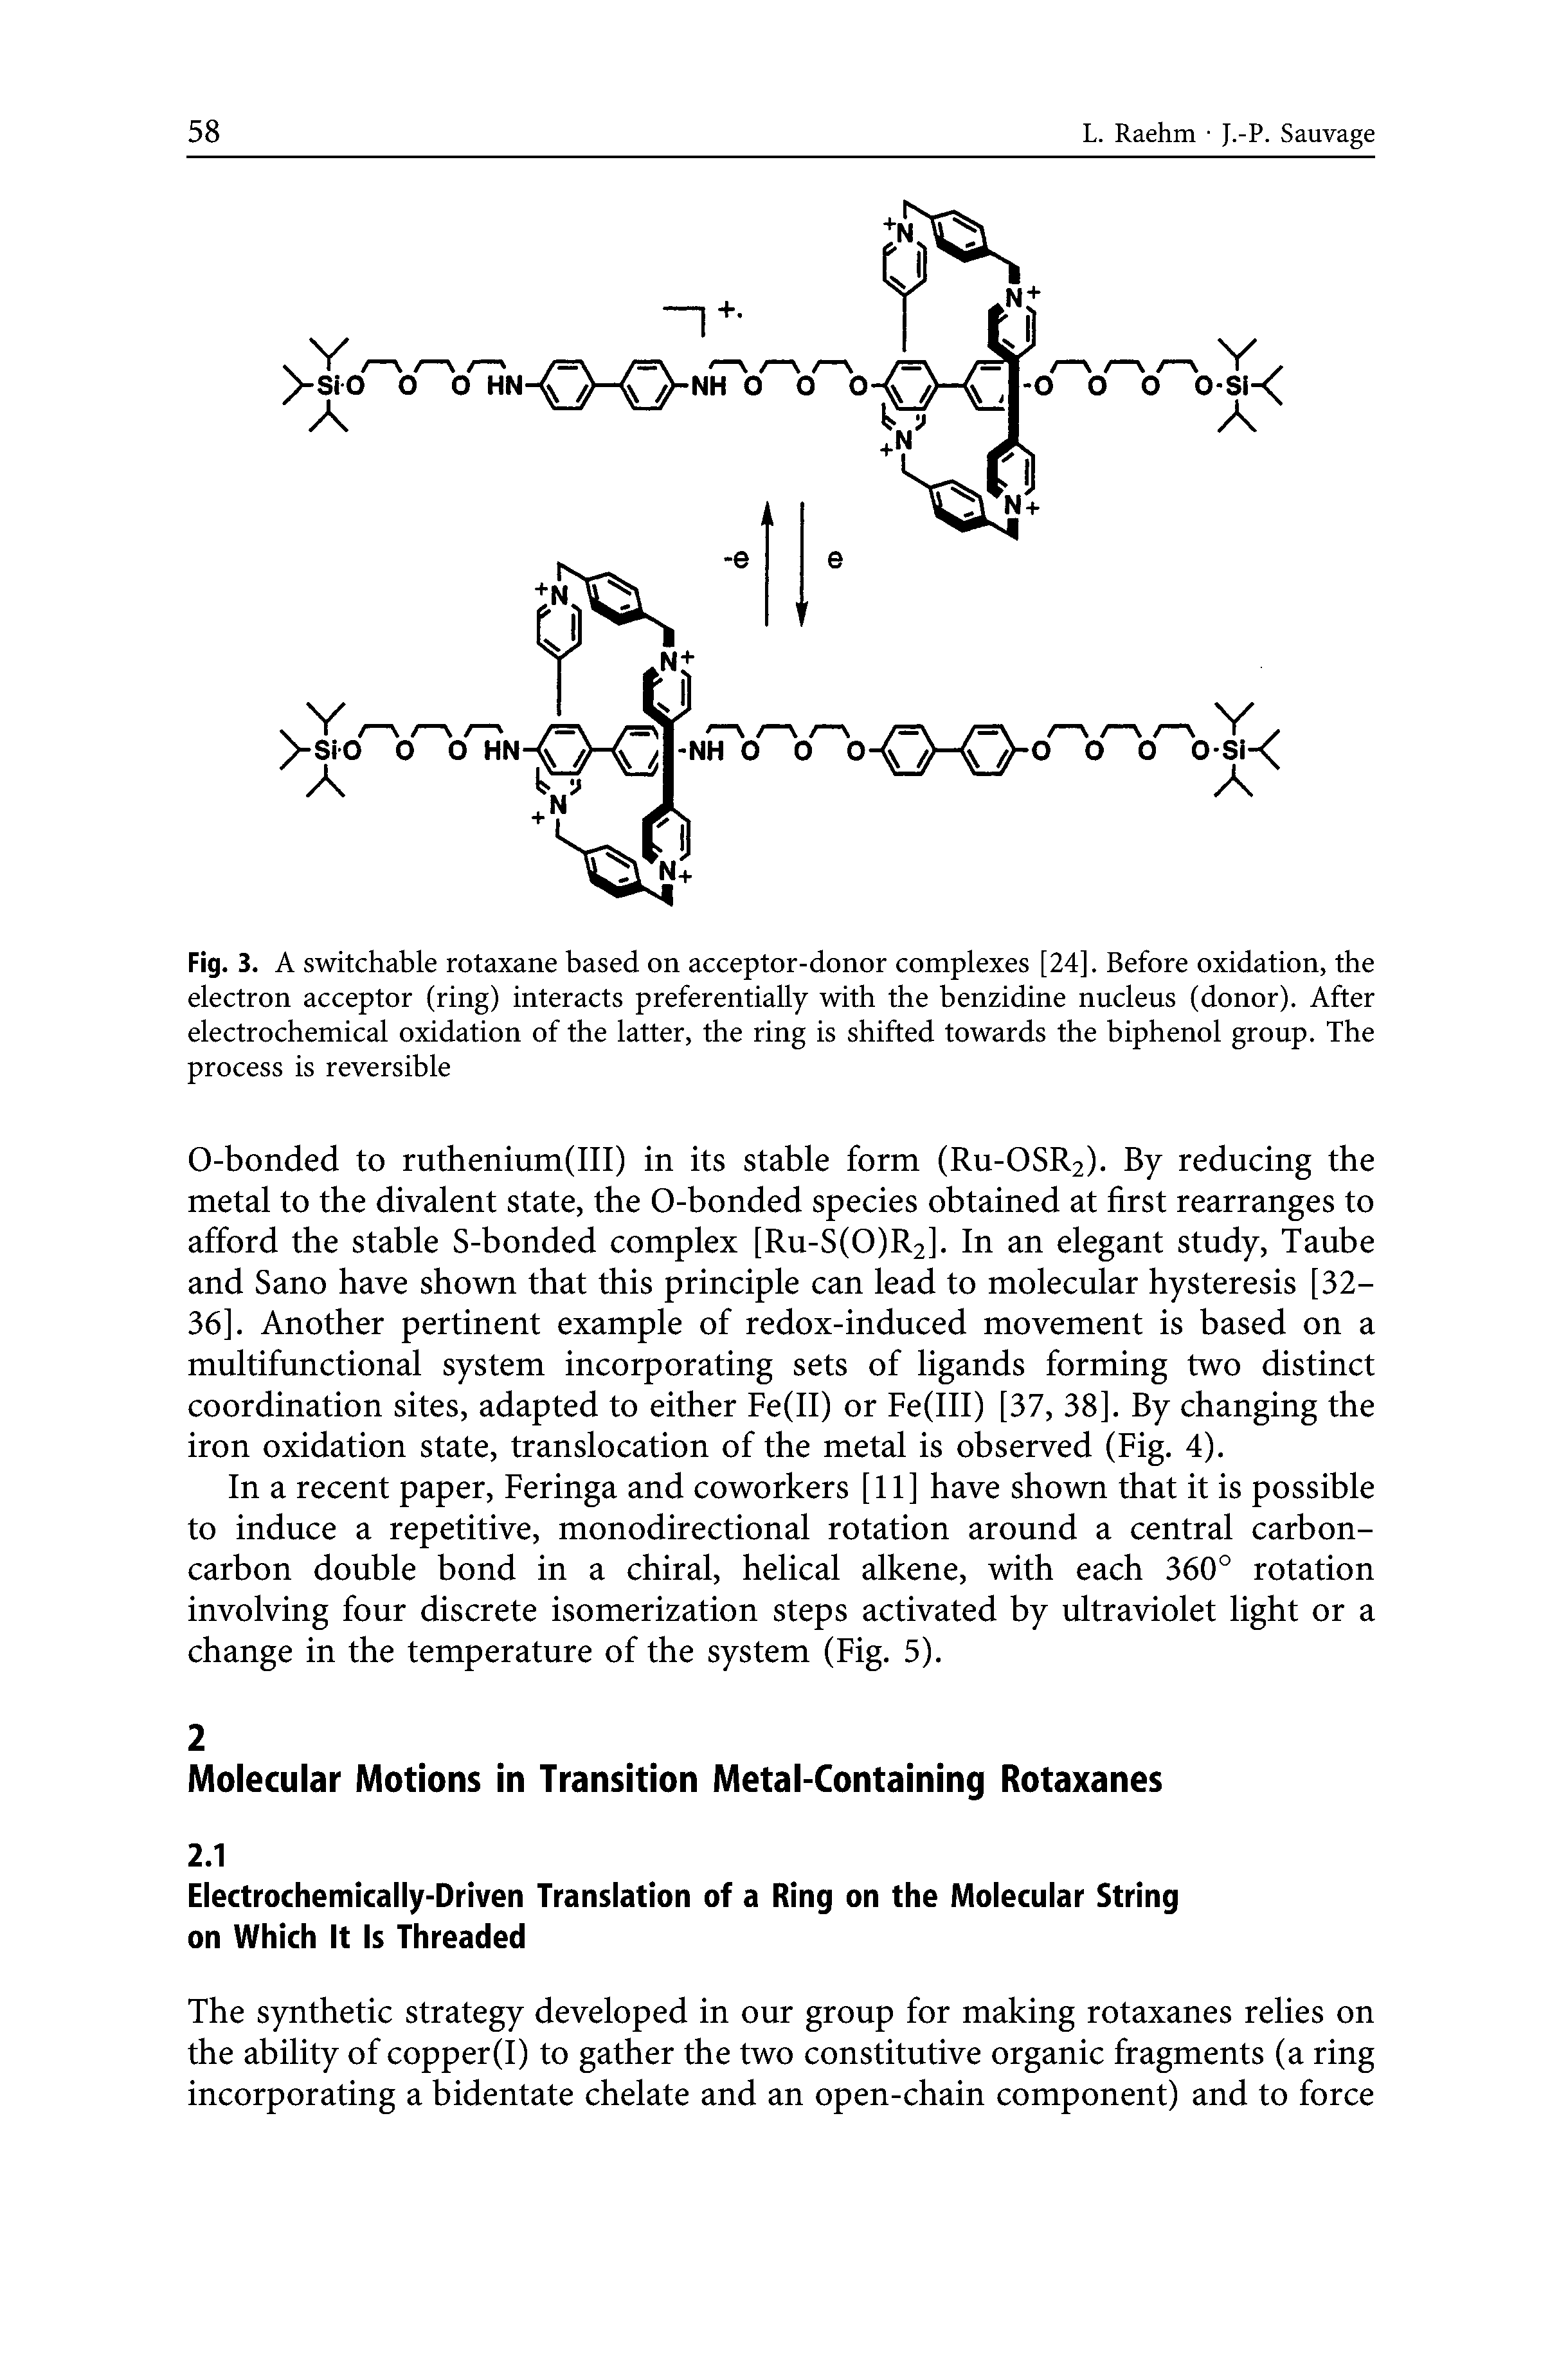 Fig. 3. A switchable rotaxane based on acceptor-donor complexes [24]. Before oxidation, the electron acceptor (ring) interacts preferentially with the benzidine nucleus (donor). After electrochemical oxidation of the latter, the ring is shifted towards the biphenol group. The process is reversible...